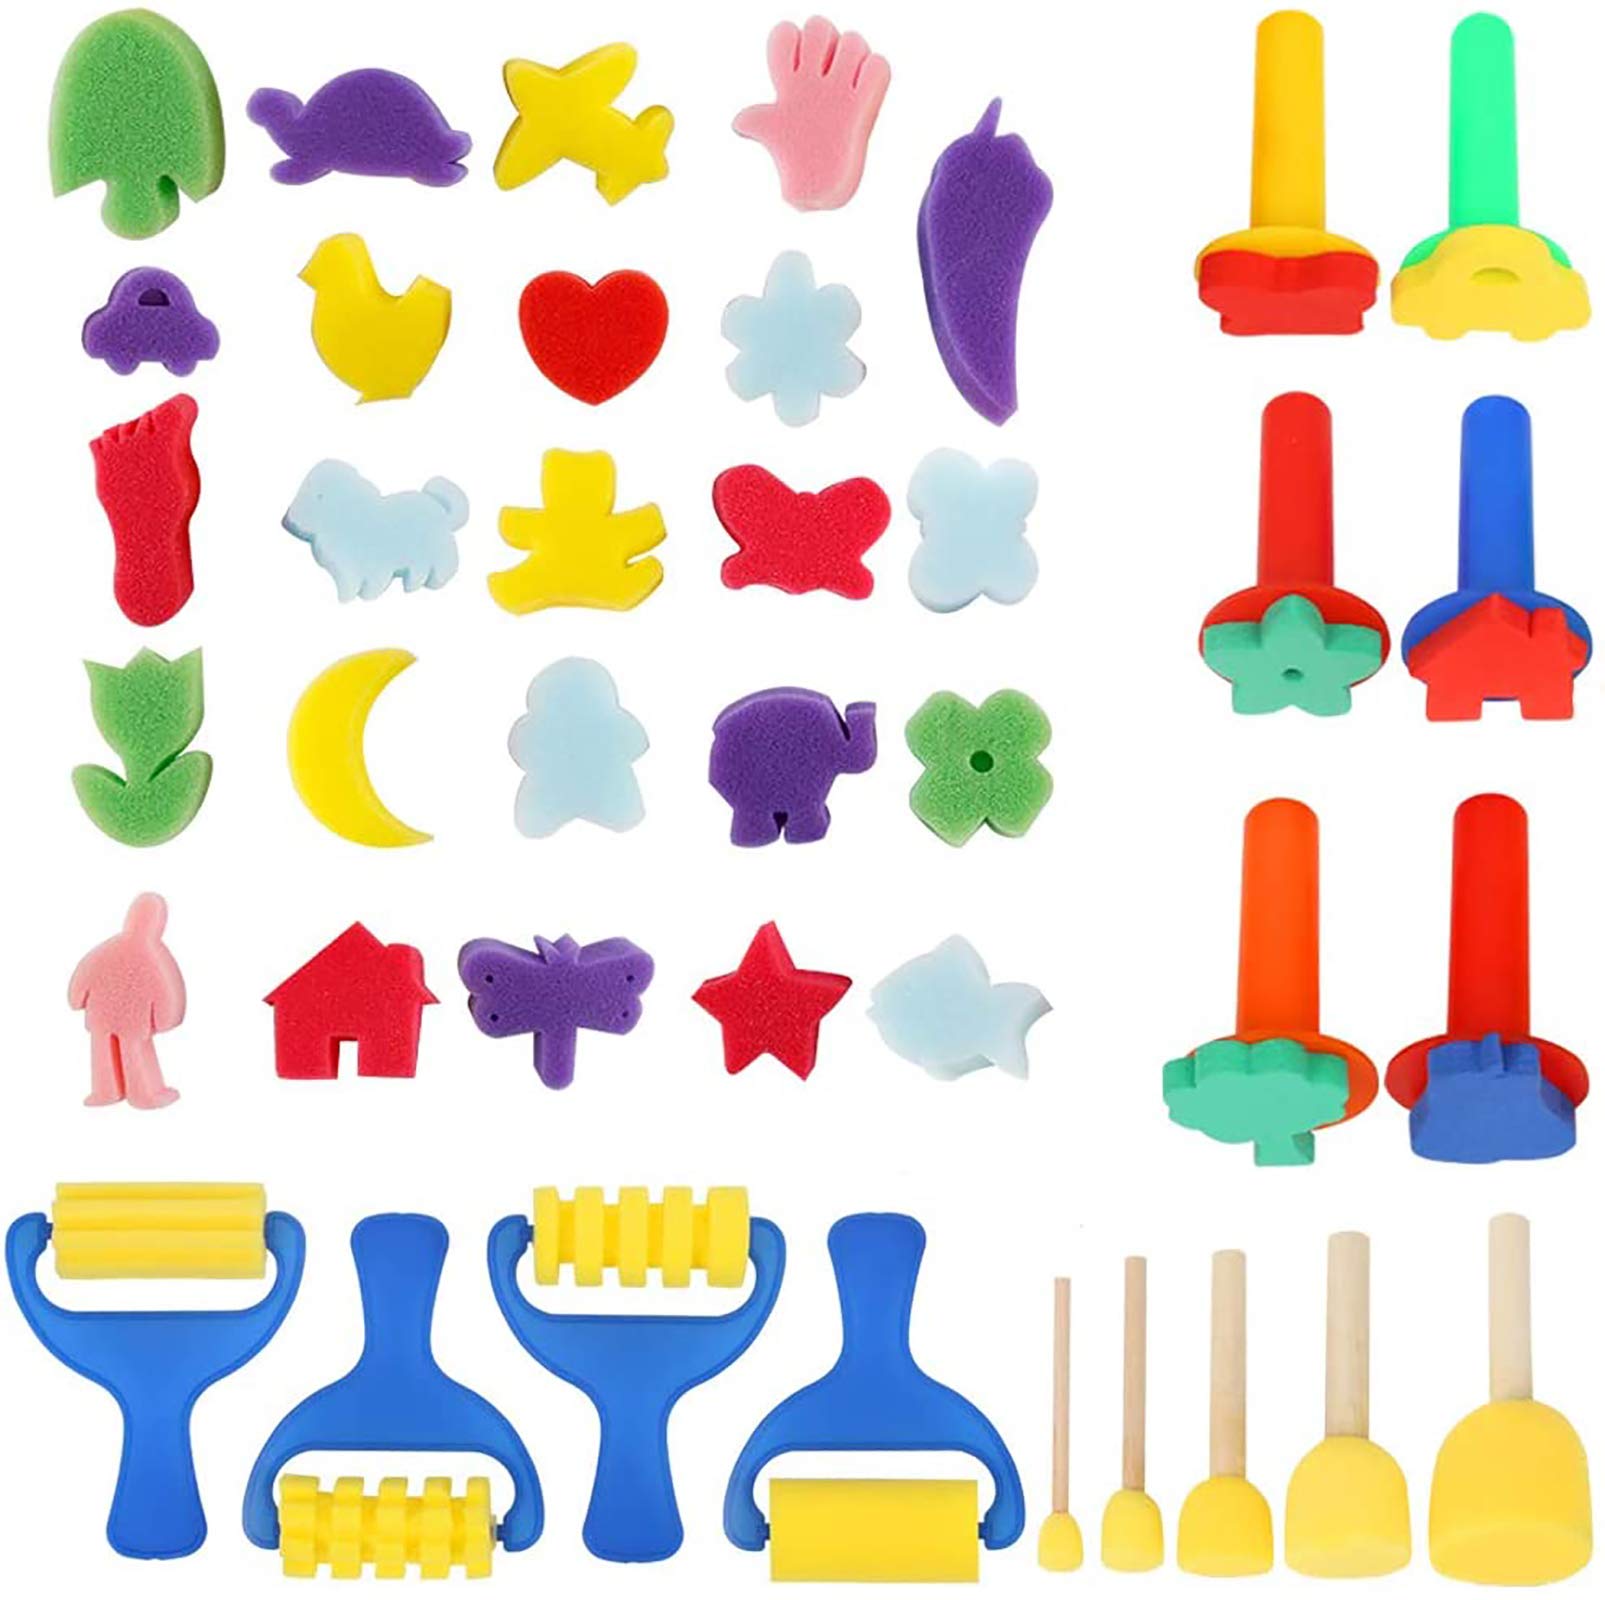 Paint Sponges for Kids YGDZ 39pcs Early Learning Toddlers Sponge